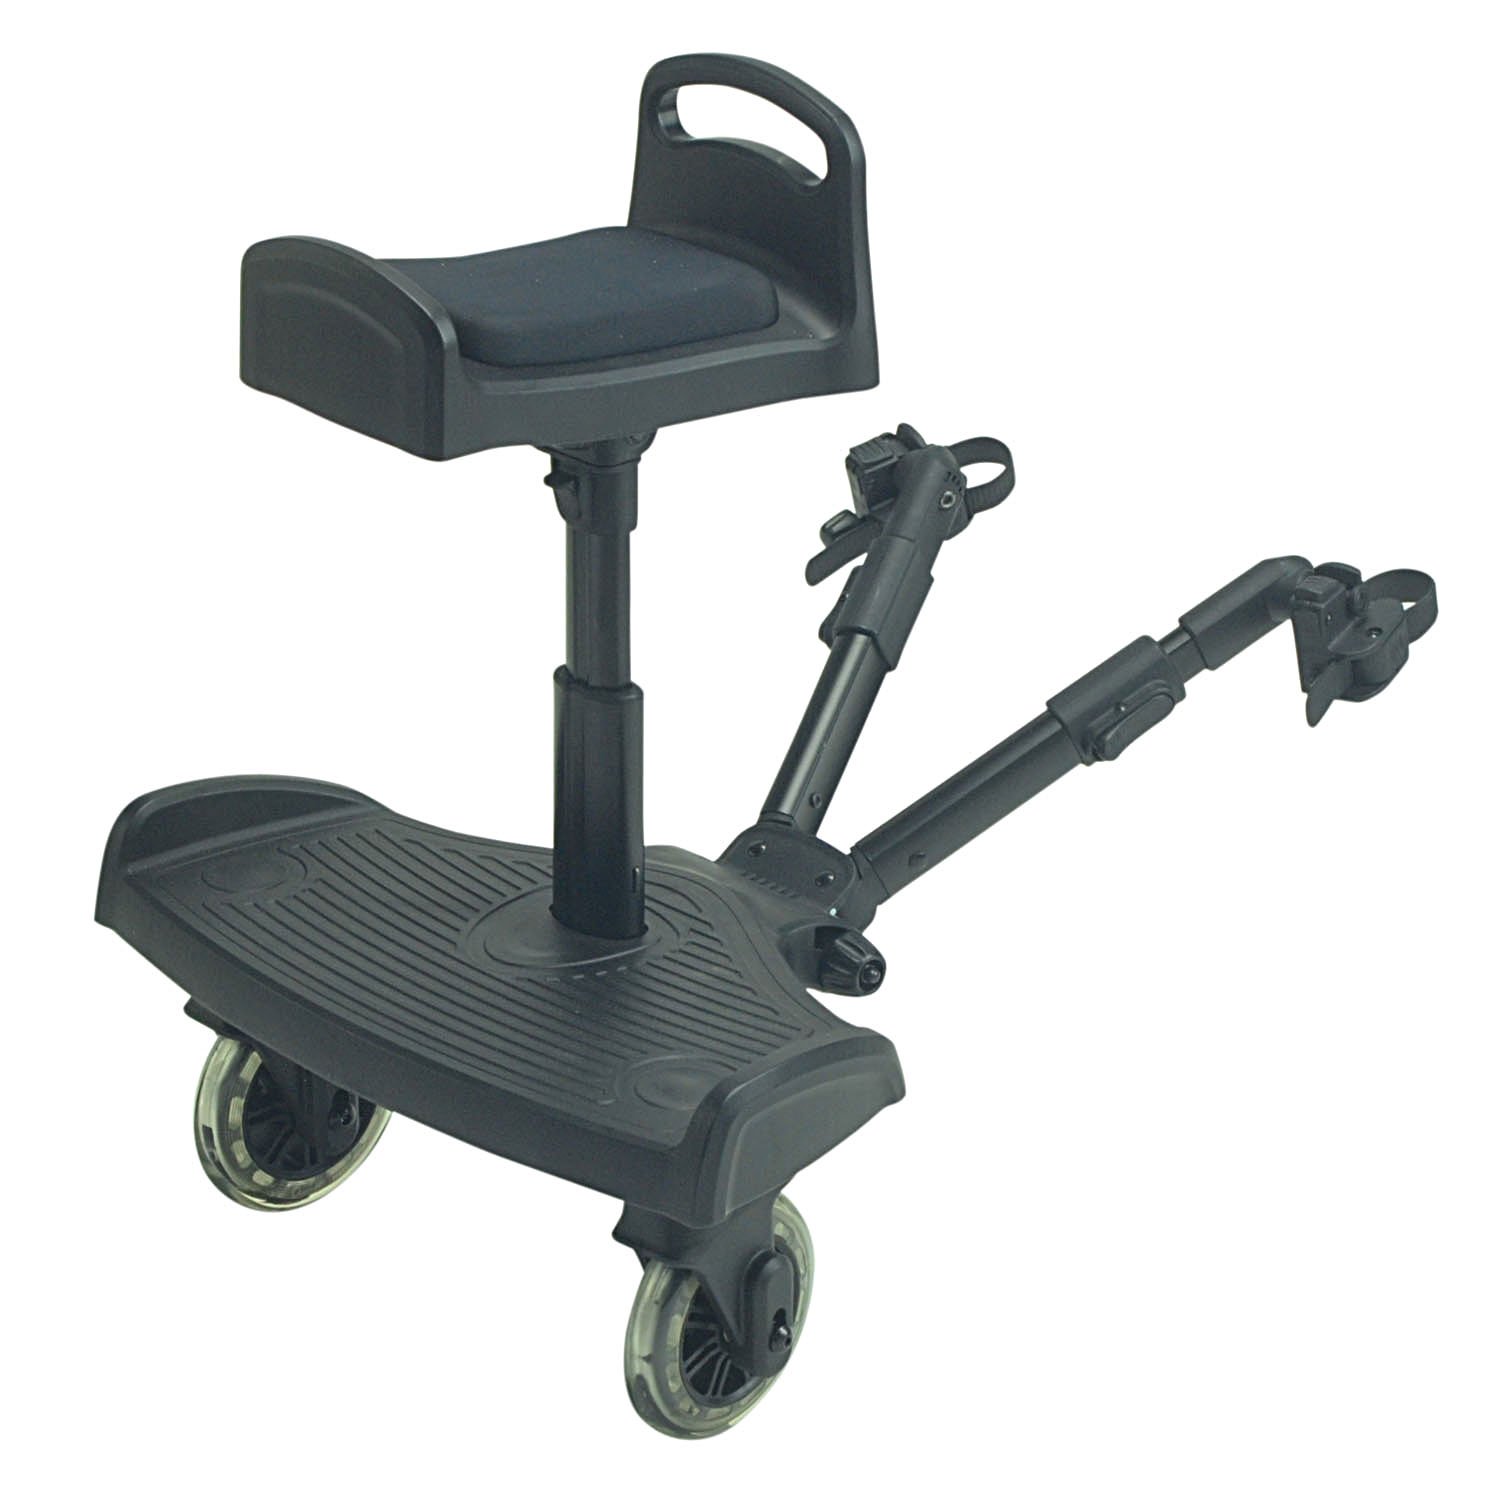 For-Your-Little-Ride On Board Compatible Travel Systems, EasyWalker SKY Twin